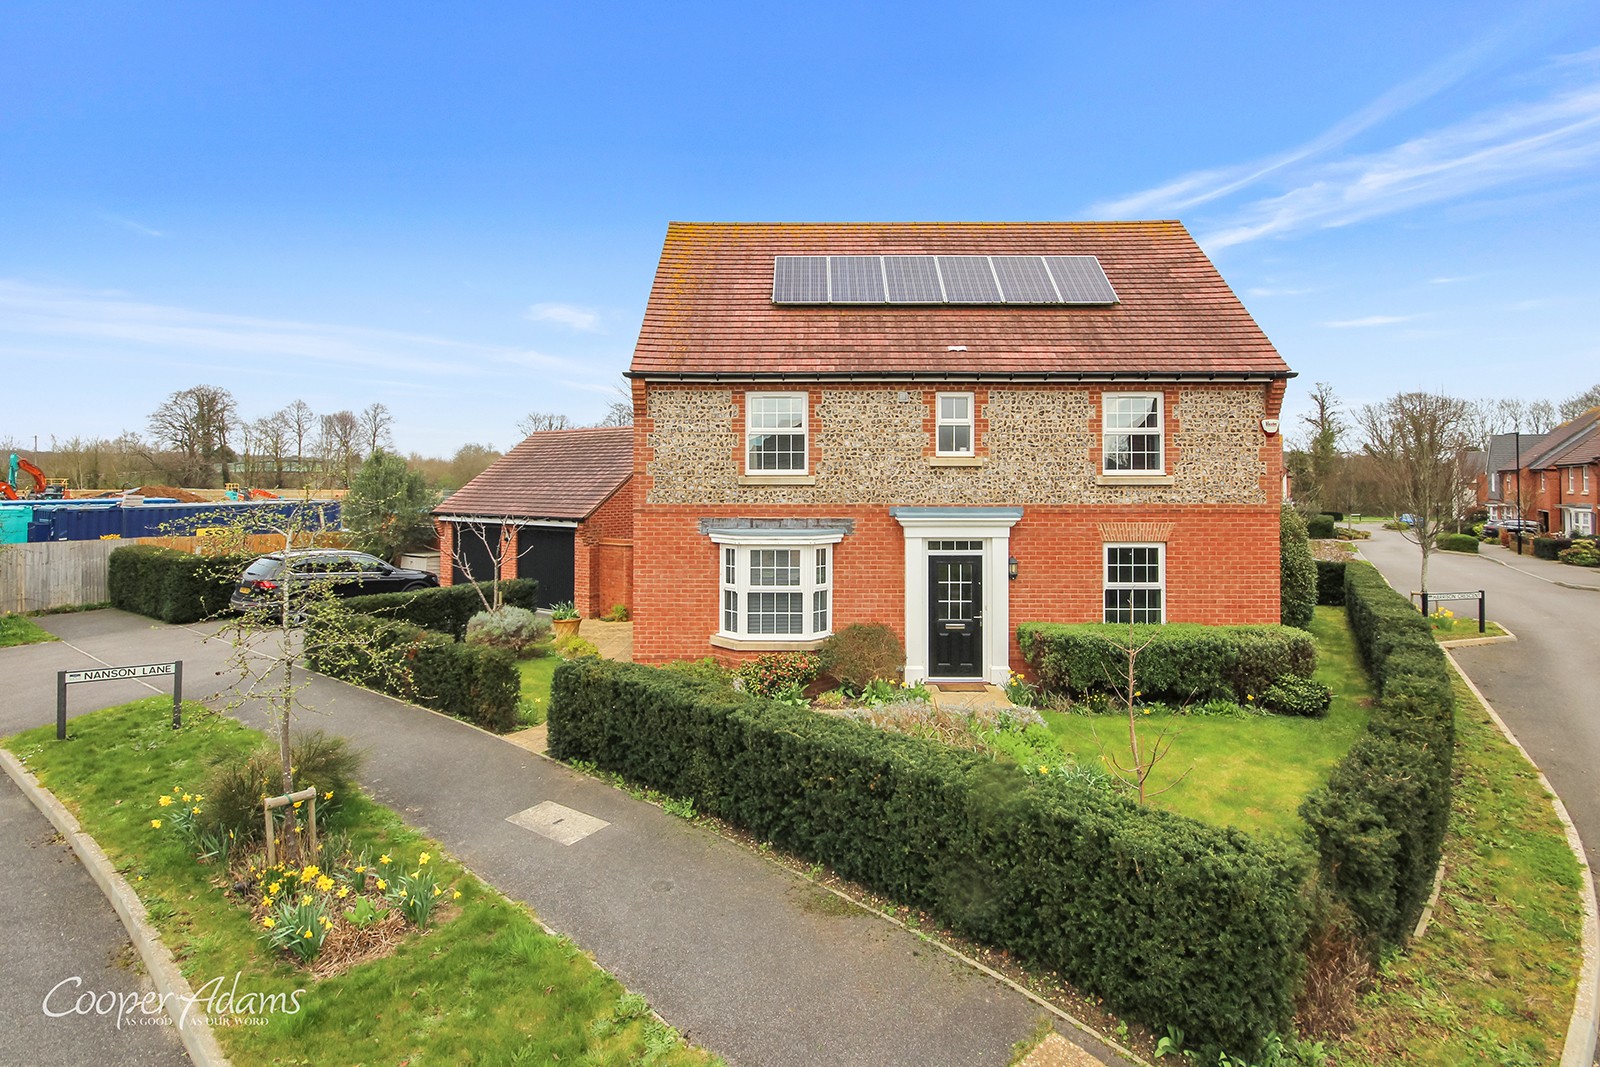 4 bed house for sale in Nanson Lane, Angmering - Property Image 1